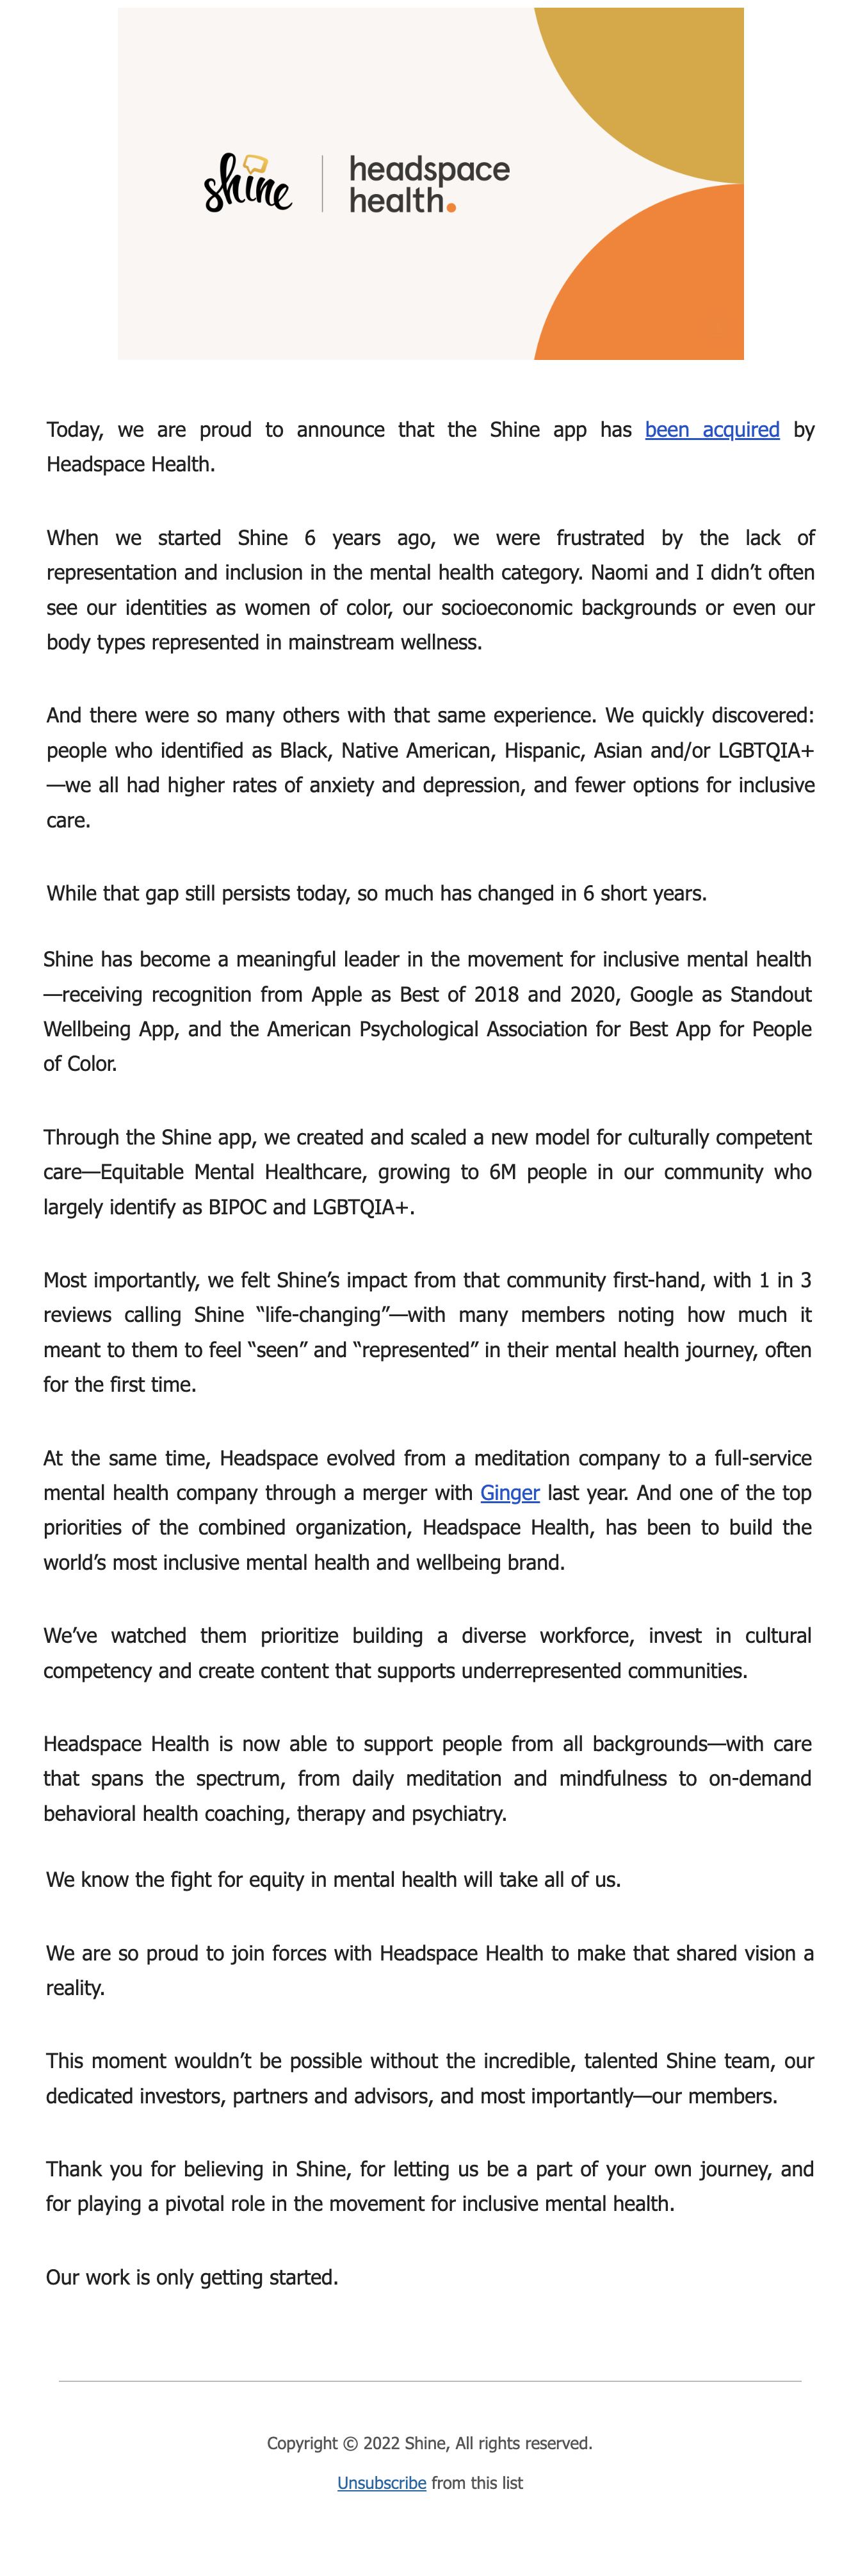 SaaS Company Acquisition Announcement Emails: Screenshot of Shine's announcement email when they got acquired by Headspace Health